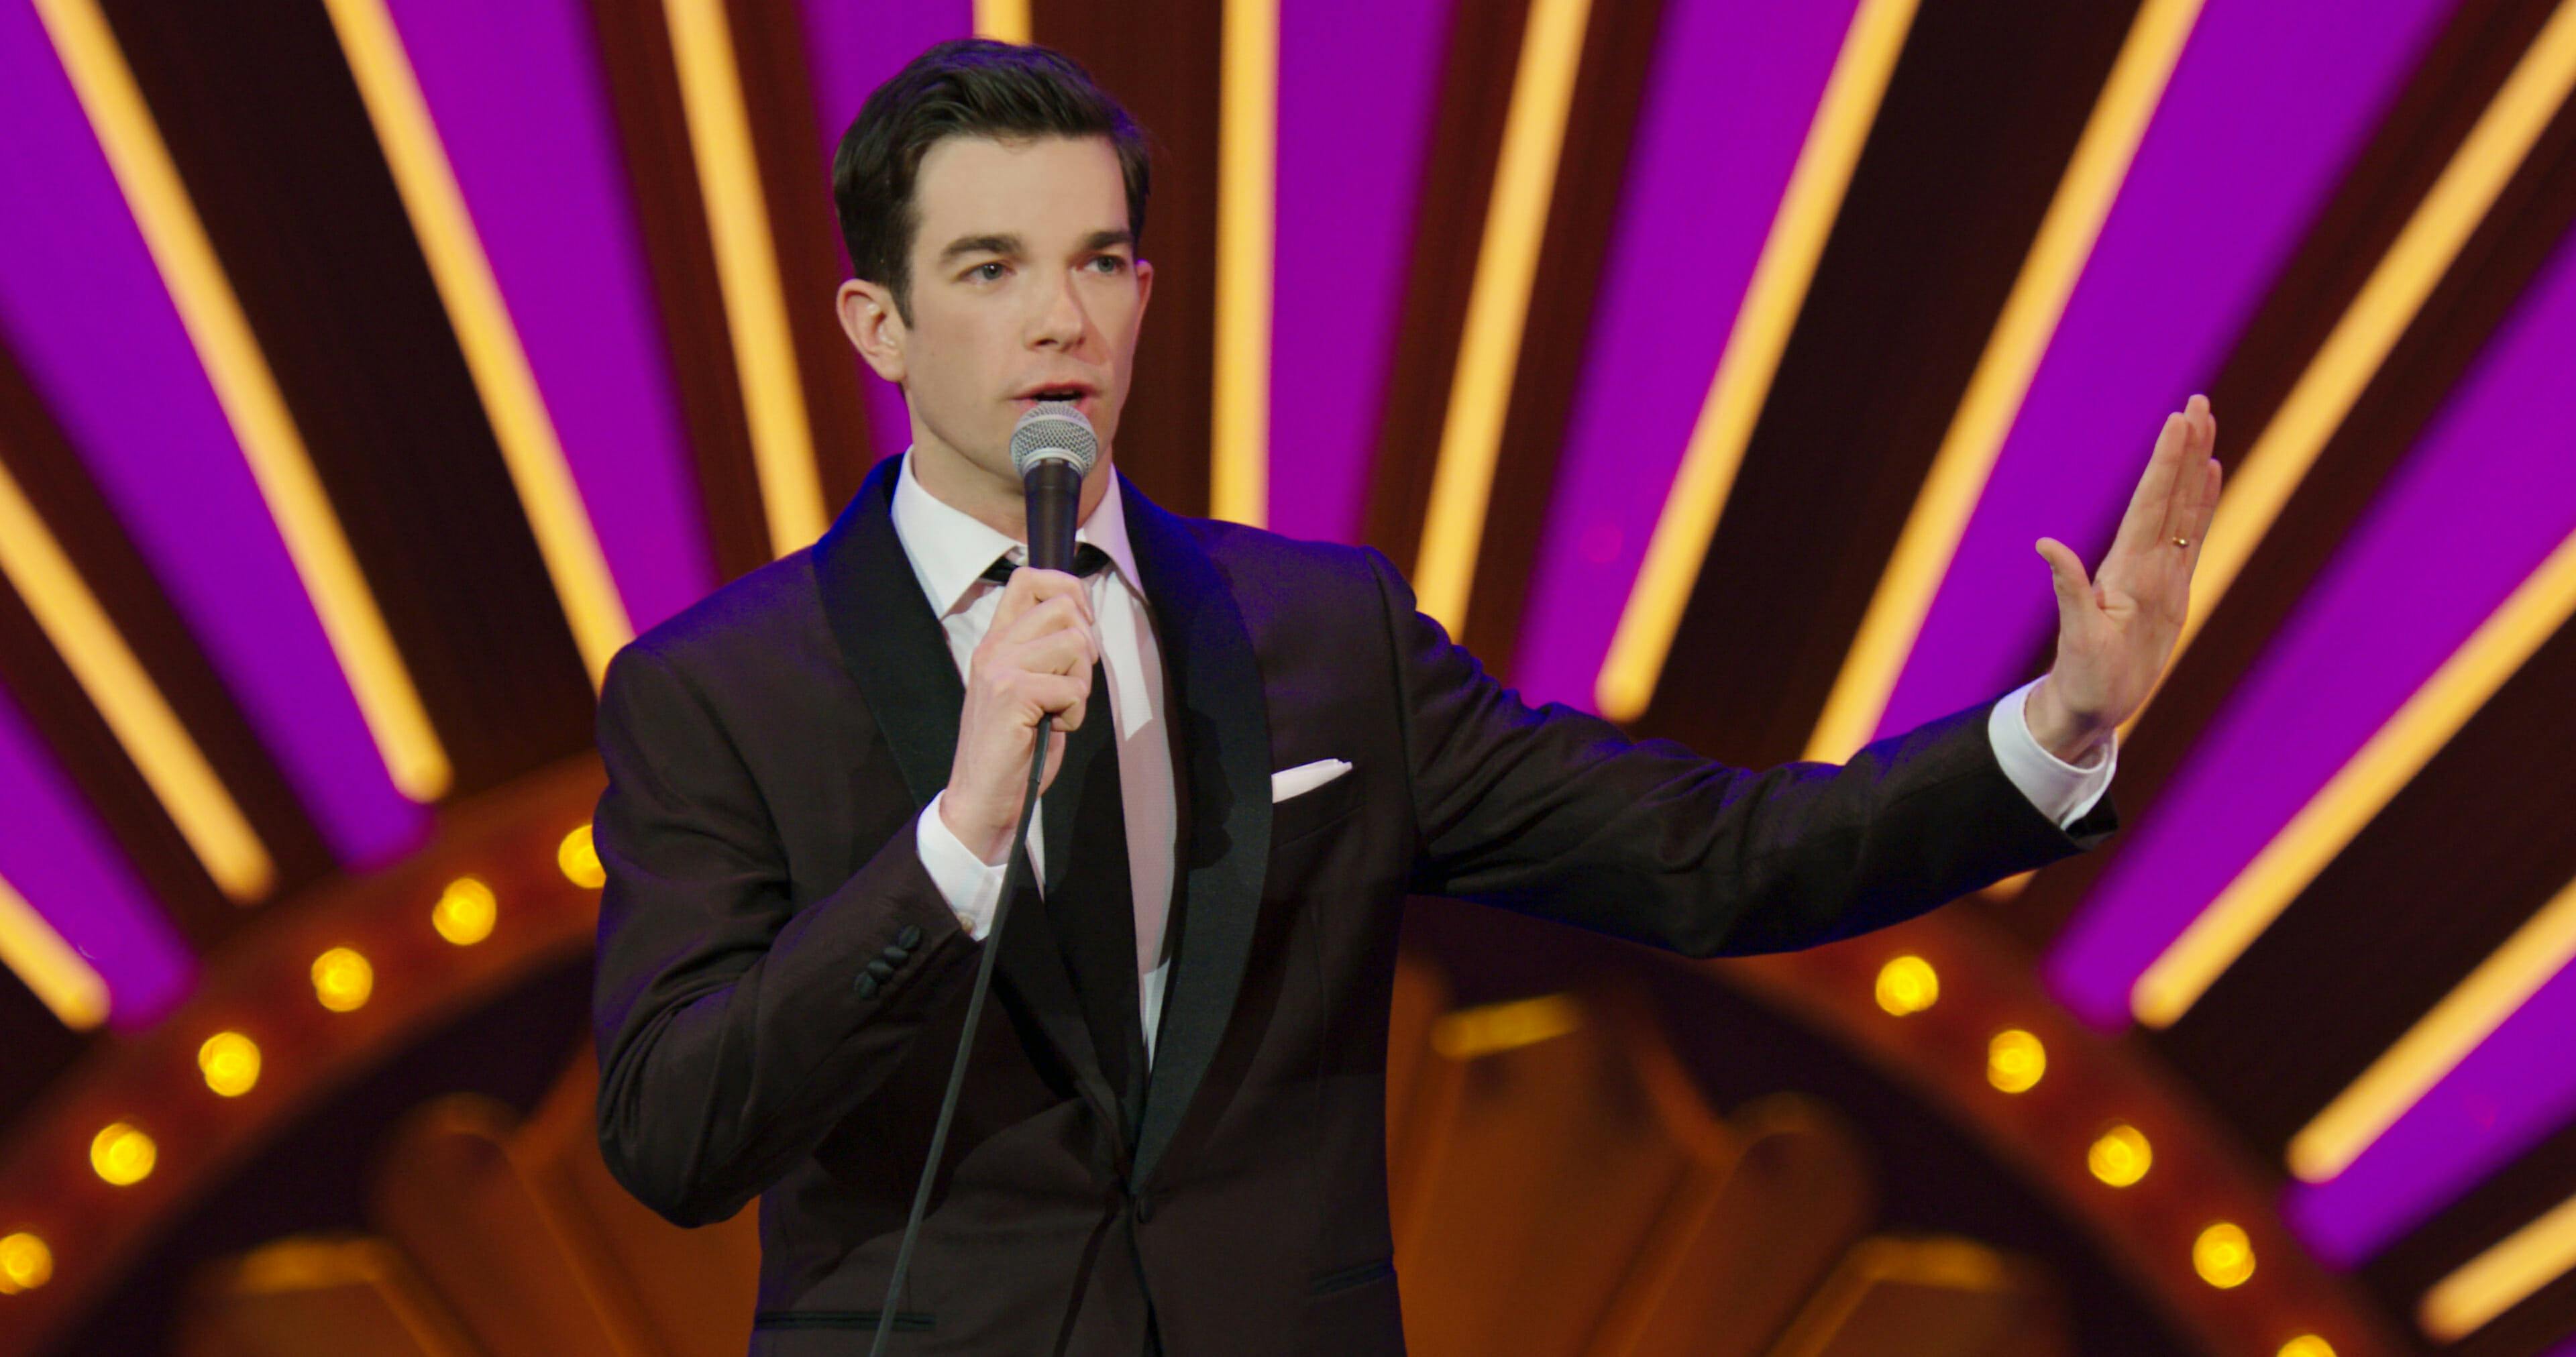 best netflix comedy specials 2018 - John Mulaney: Kid Gorgeous at Radio City review